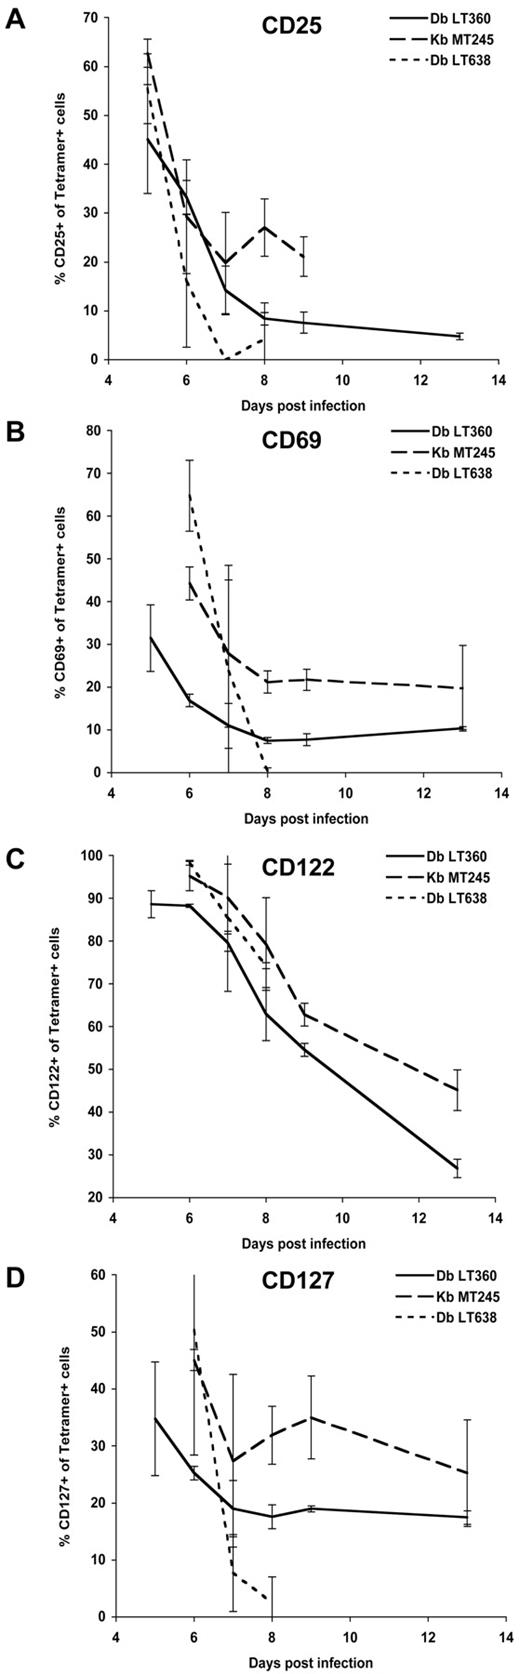 FIGURE 4. Phenotypic analysis of epitope-specific CD8+ T cell responses during PyV infection. On the indicated day after infection, the cell surface expression of CD25 (IL-2Rα; A), CD69 (B), CD122 (IL-2R/IL-15Rβ chain; C), and CD127 (IL-7Rα; D) on LT360-, MT245-, and LT638-specific CD8+ T cell populations in the spleen were analyzed by flow cytometry. Values represent the mean frequency ± SD (three mice) of a class I MHC tetramer+ CD8+ population that expresses a cell surface molecule.